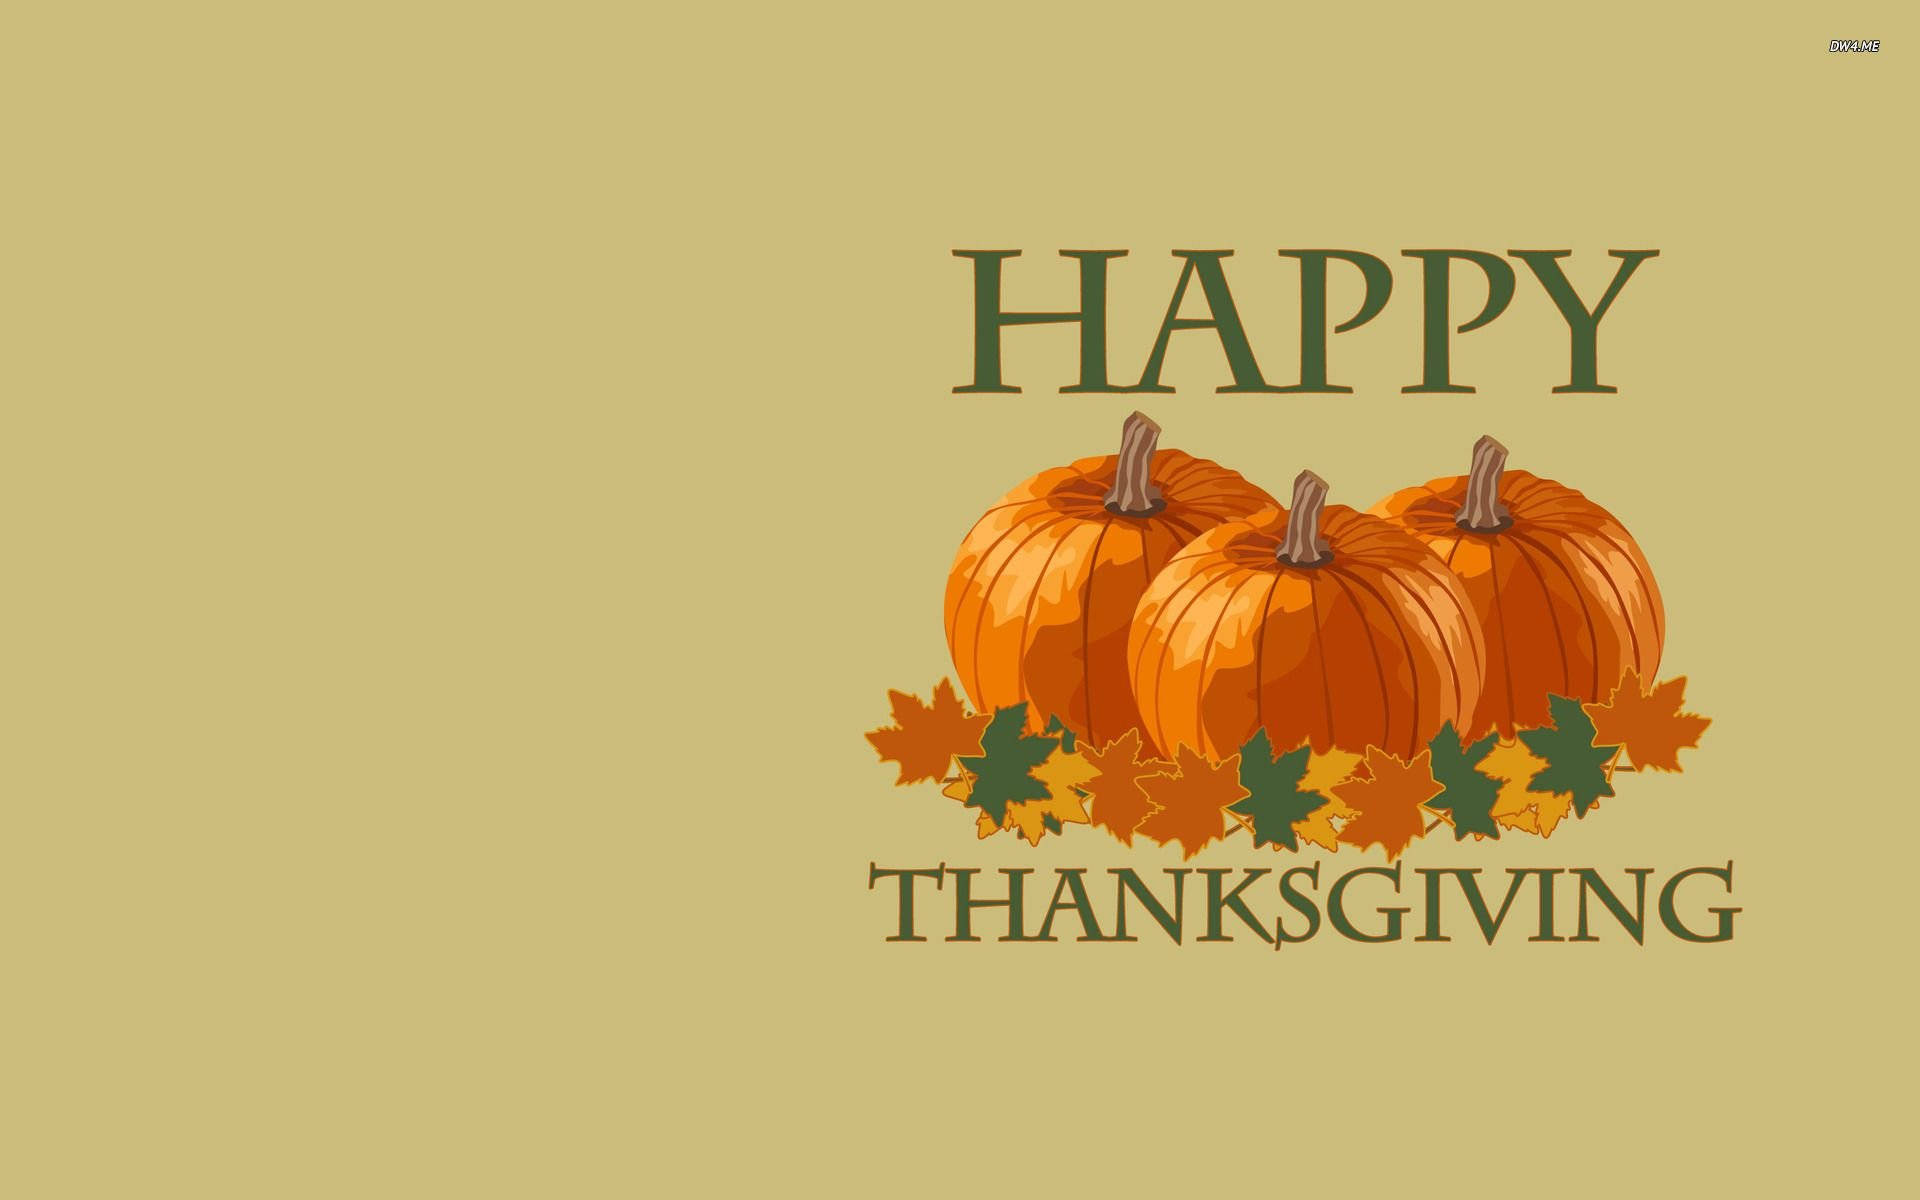 Celebrate Thanksgiving with a Whole Turkey! Wallpaper